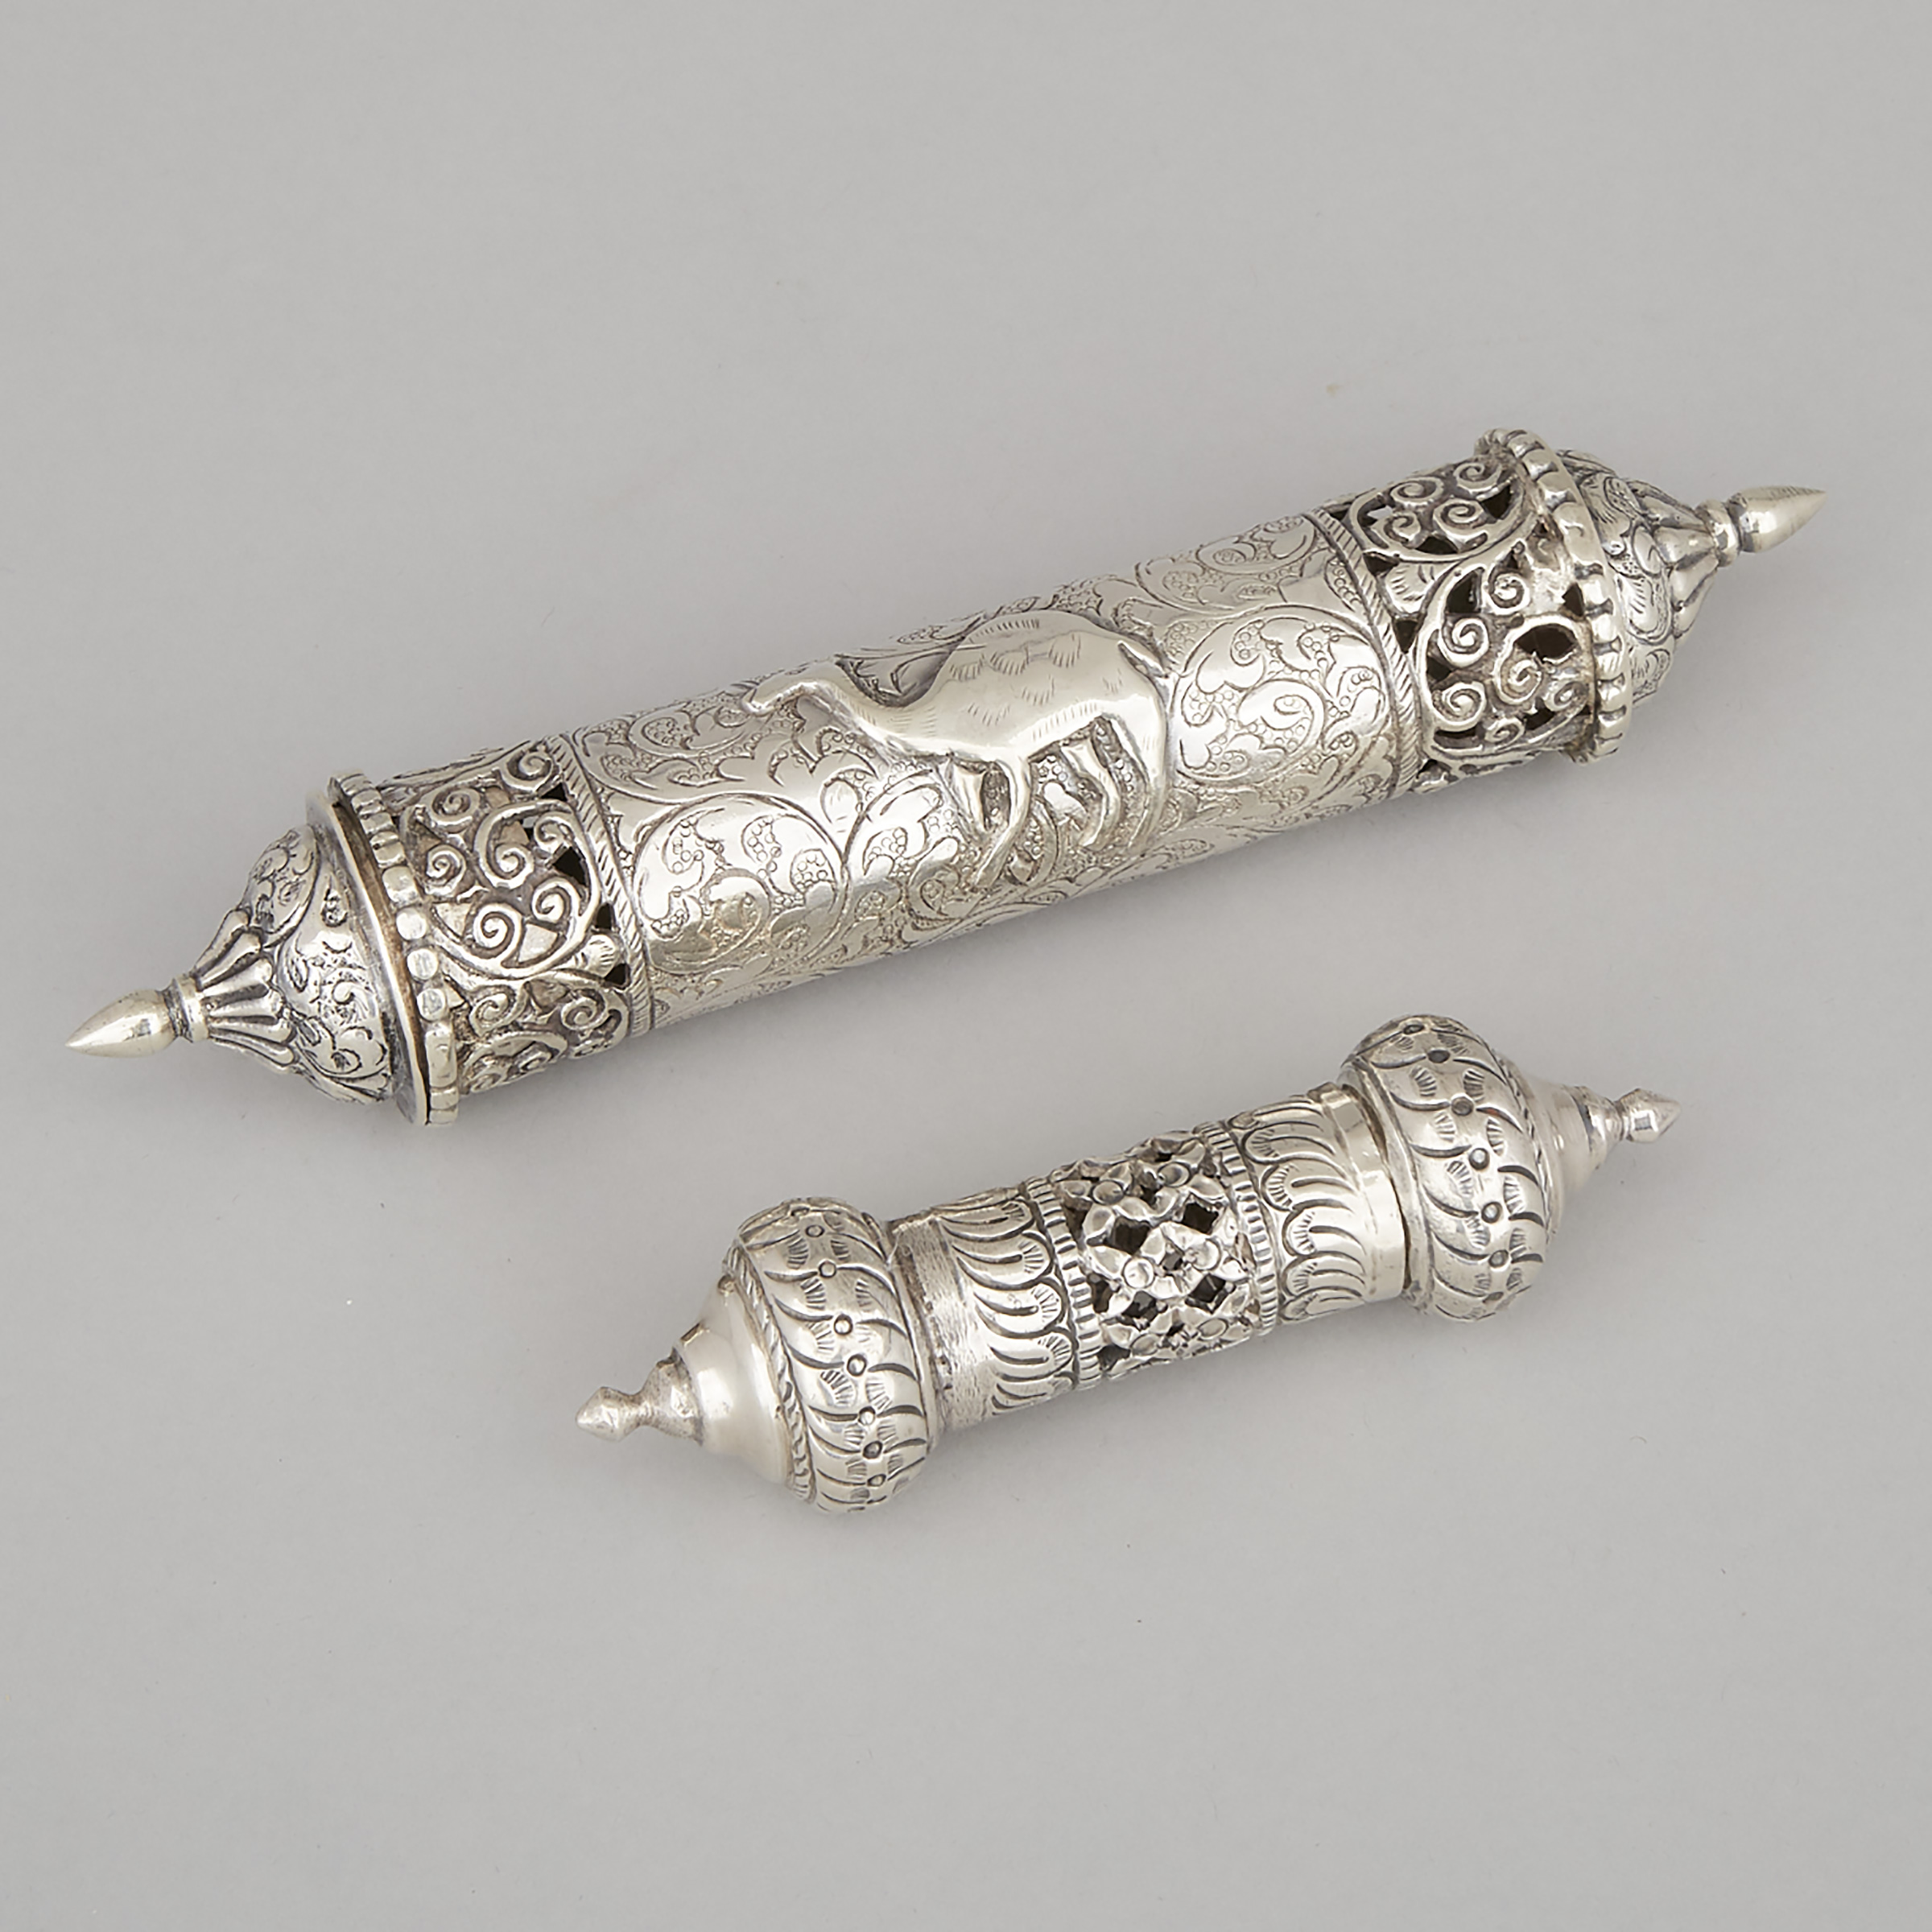 Two Middle Eastern Silver Scroll Cases, late 19th/early 20th century